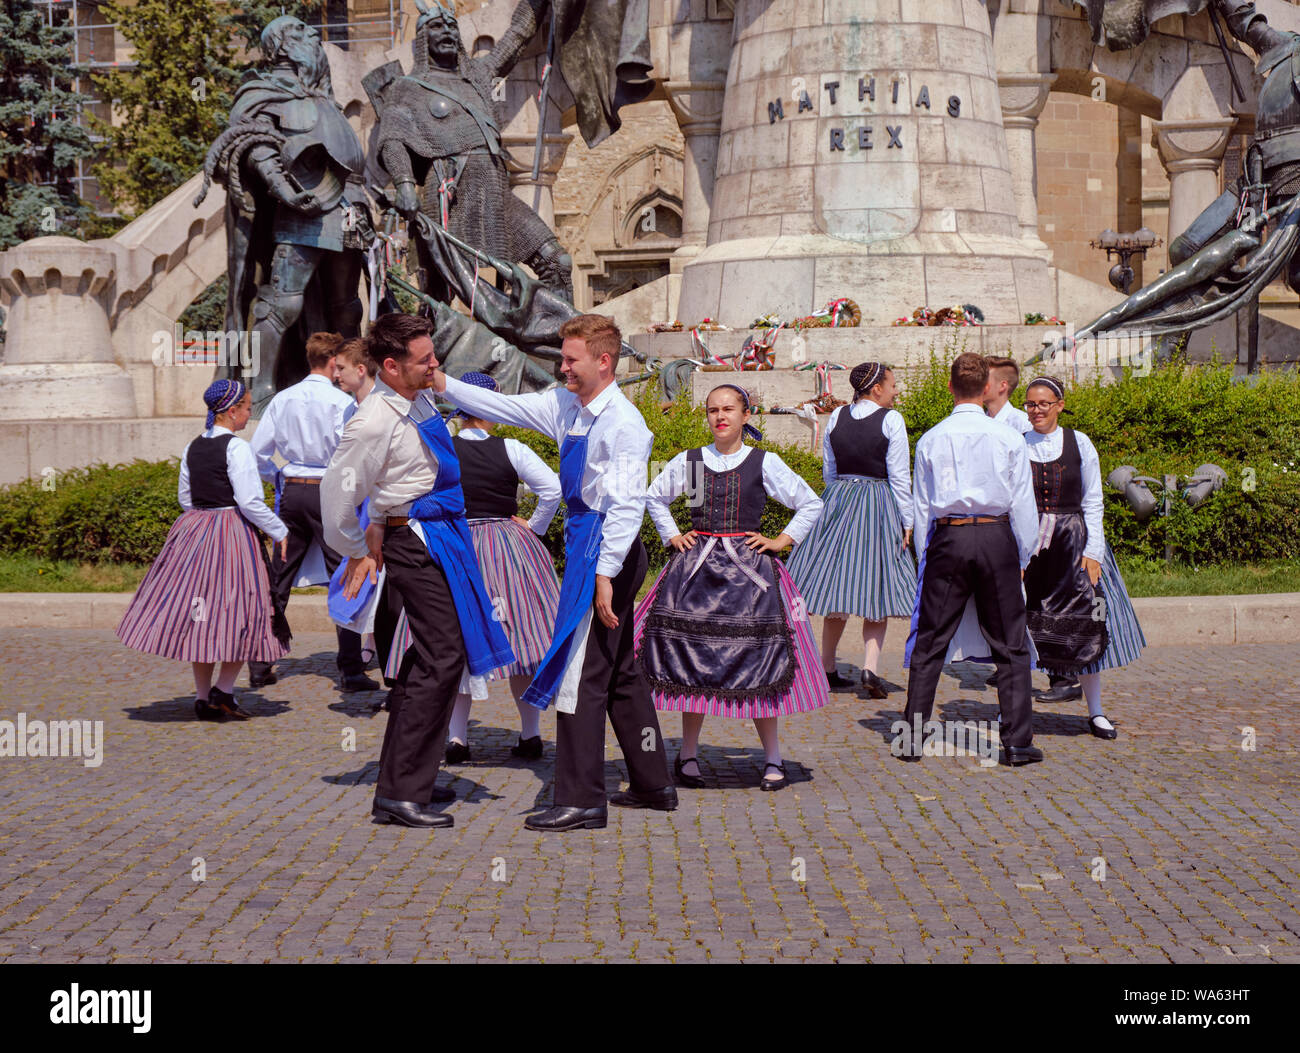 Hungarian Traditional dance in folkloric customs public performance in square. Males performing face slapping number under disapproving lady look Stock Photo